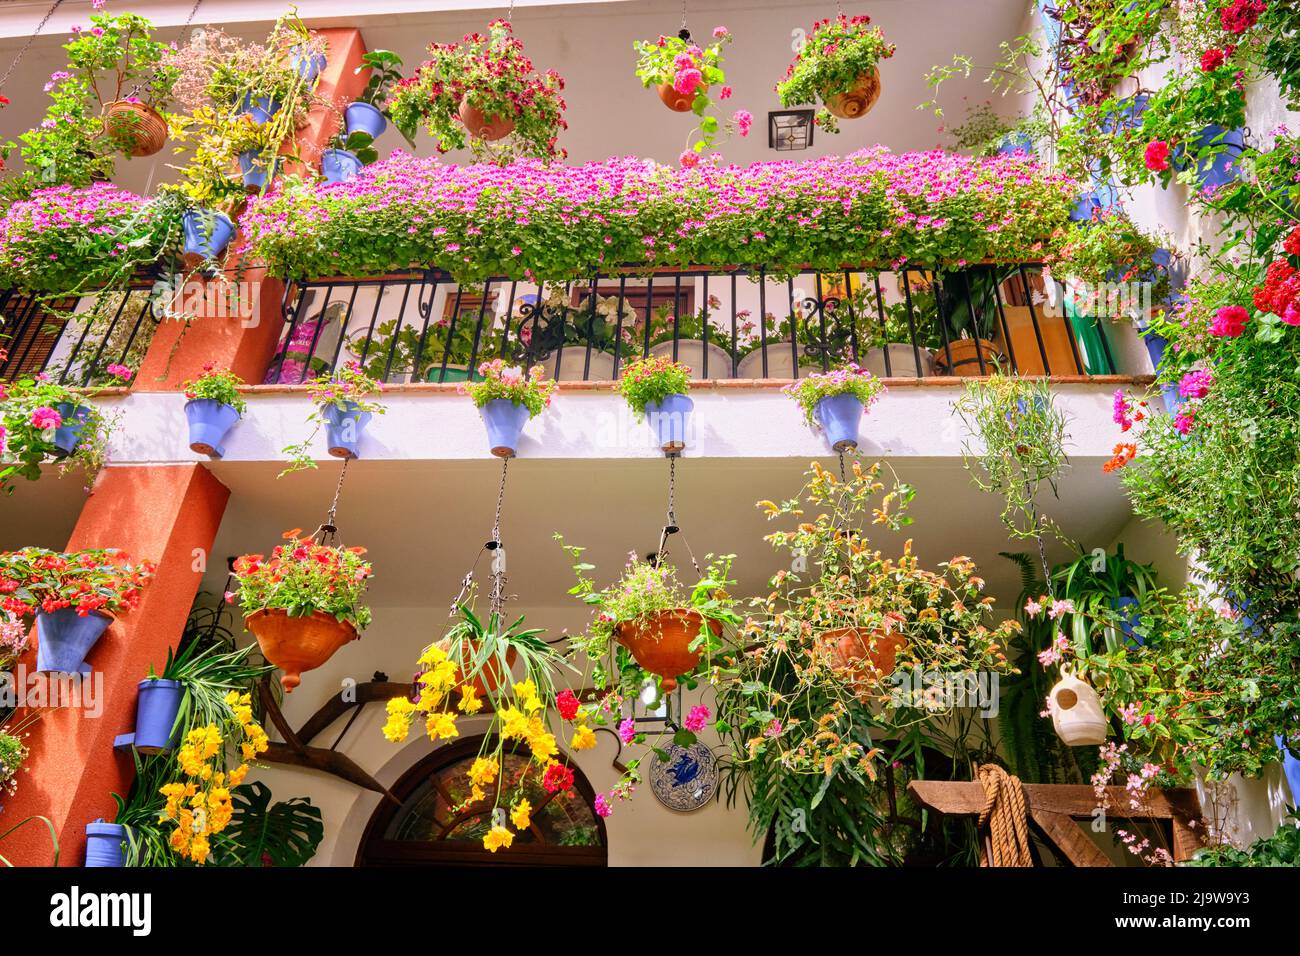 A traditional Patio of Cordoba, a courtyard full of flowers and freshness. San Basilio, Andalucia, Spain Stock Photo